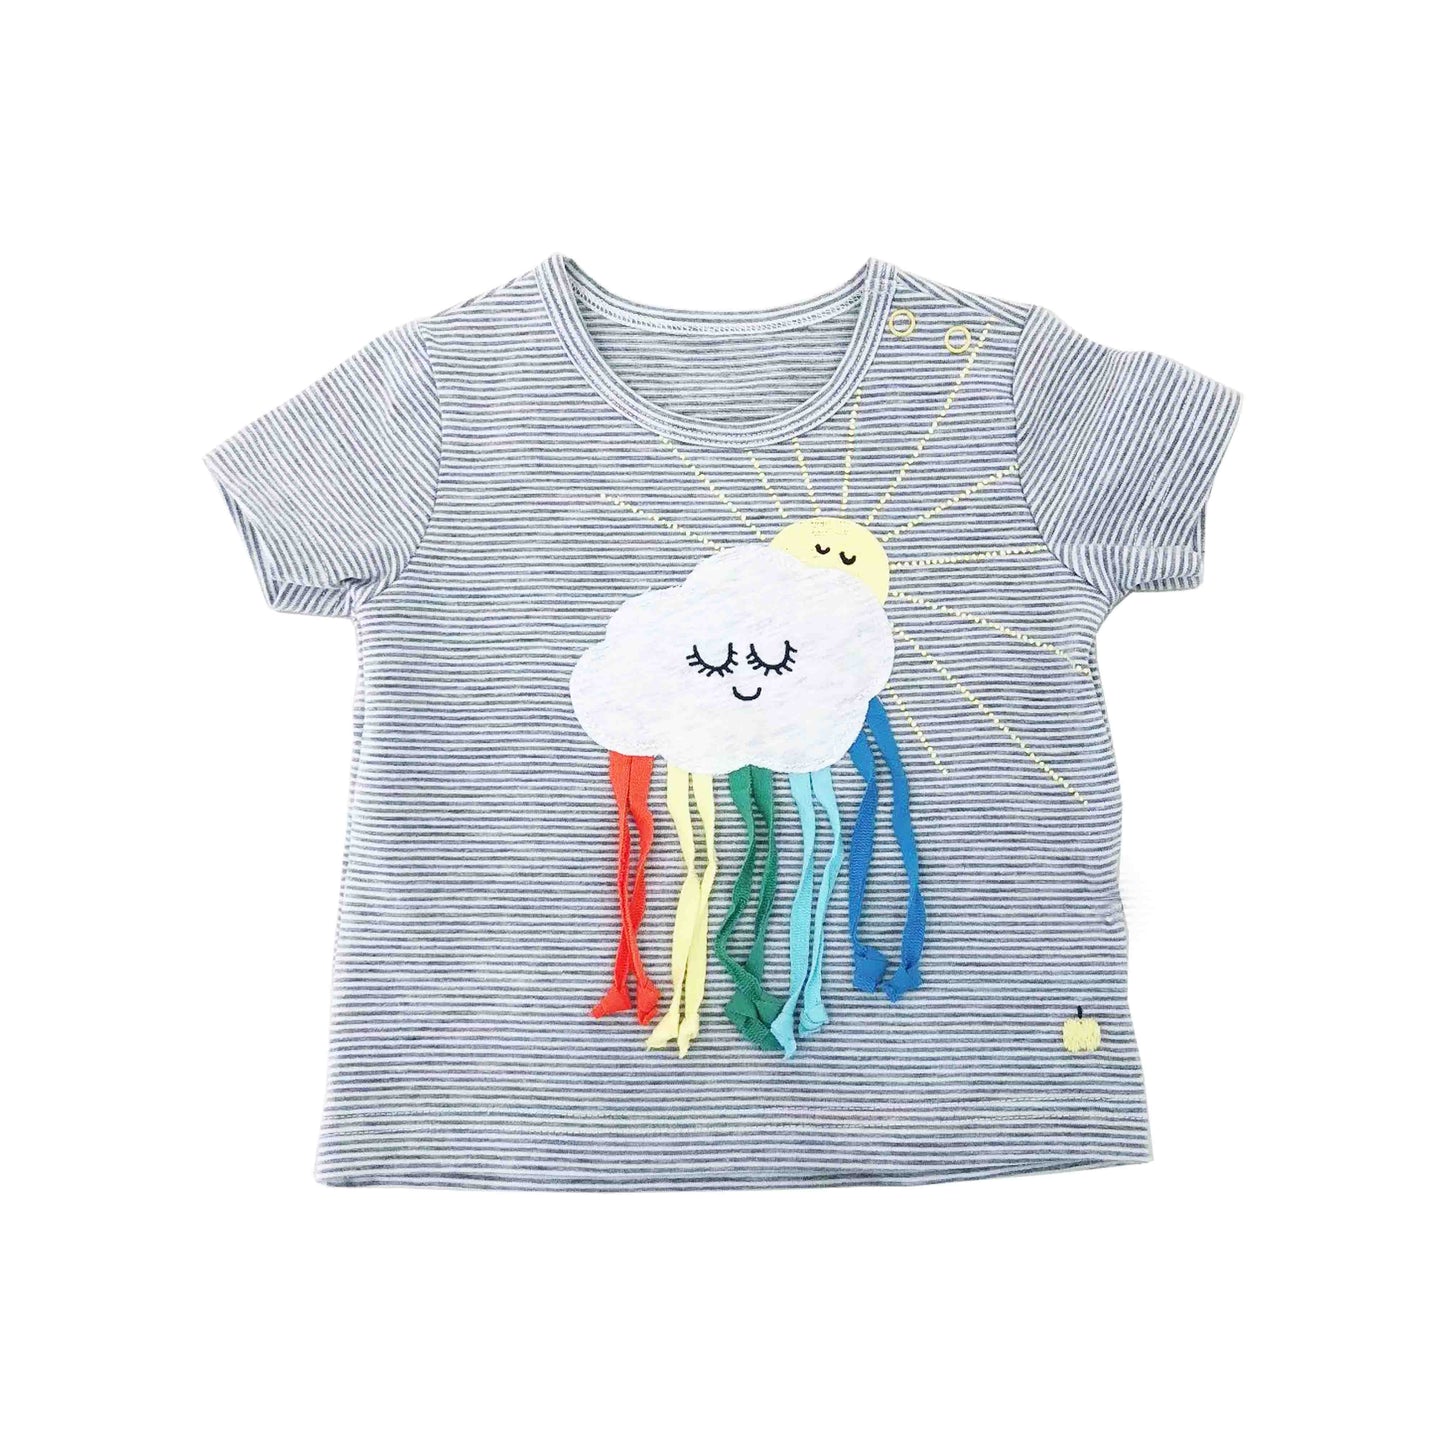 TSHIRT - BABY - 3 COLOR (BLUE/GREY/PINK) - L-CHELSEA